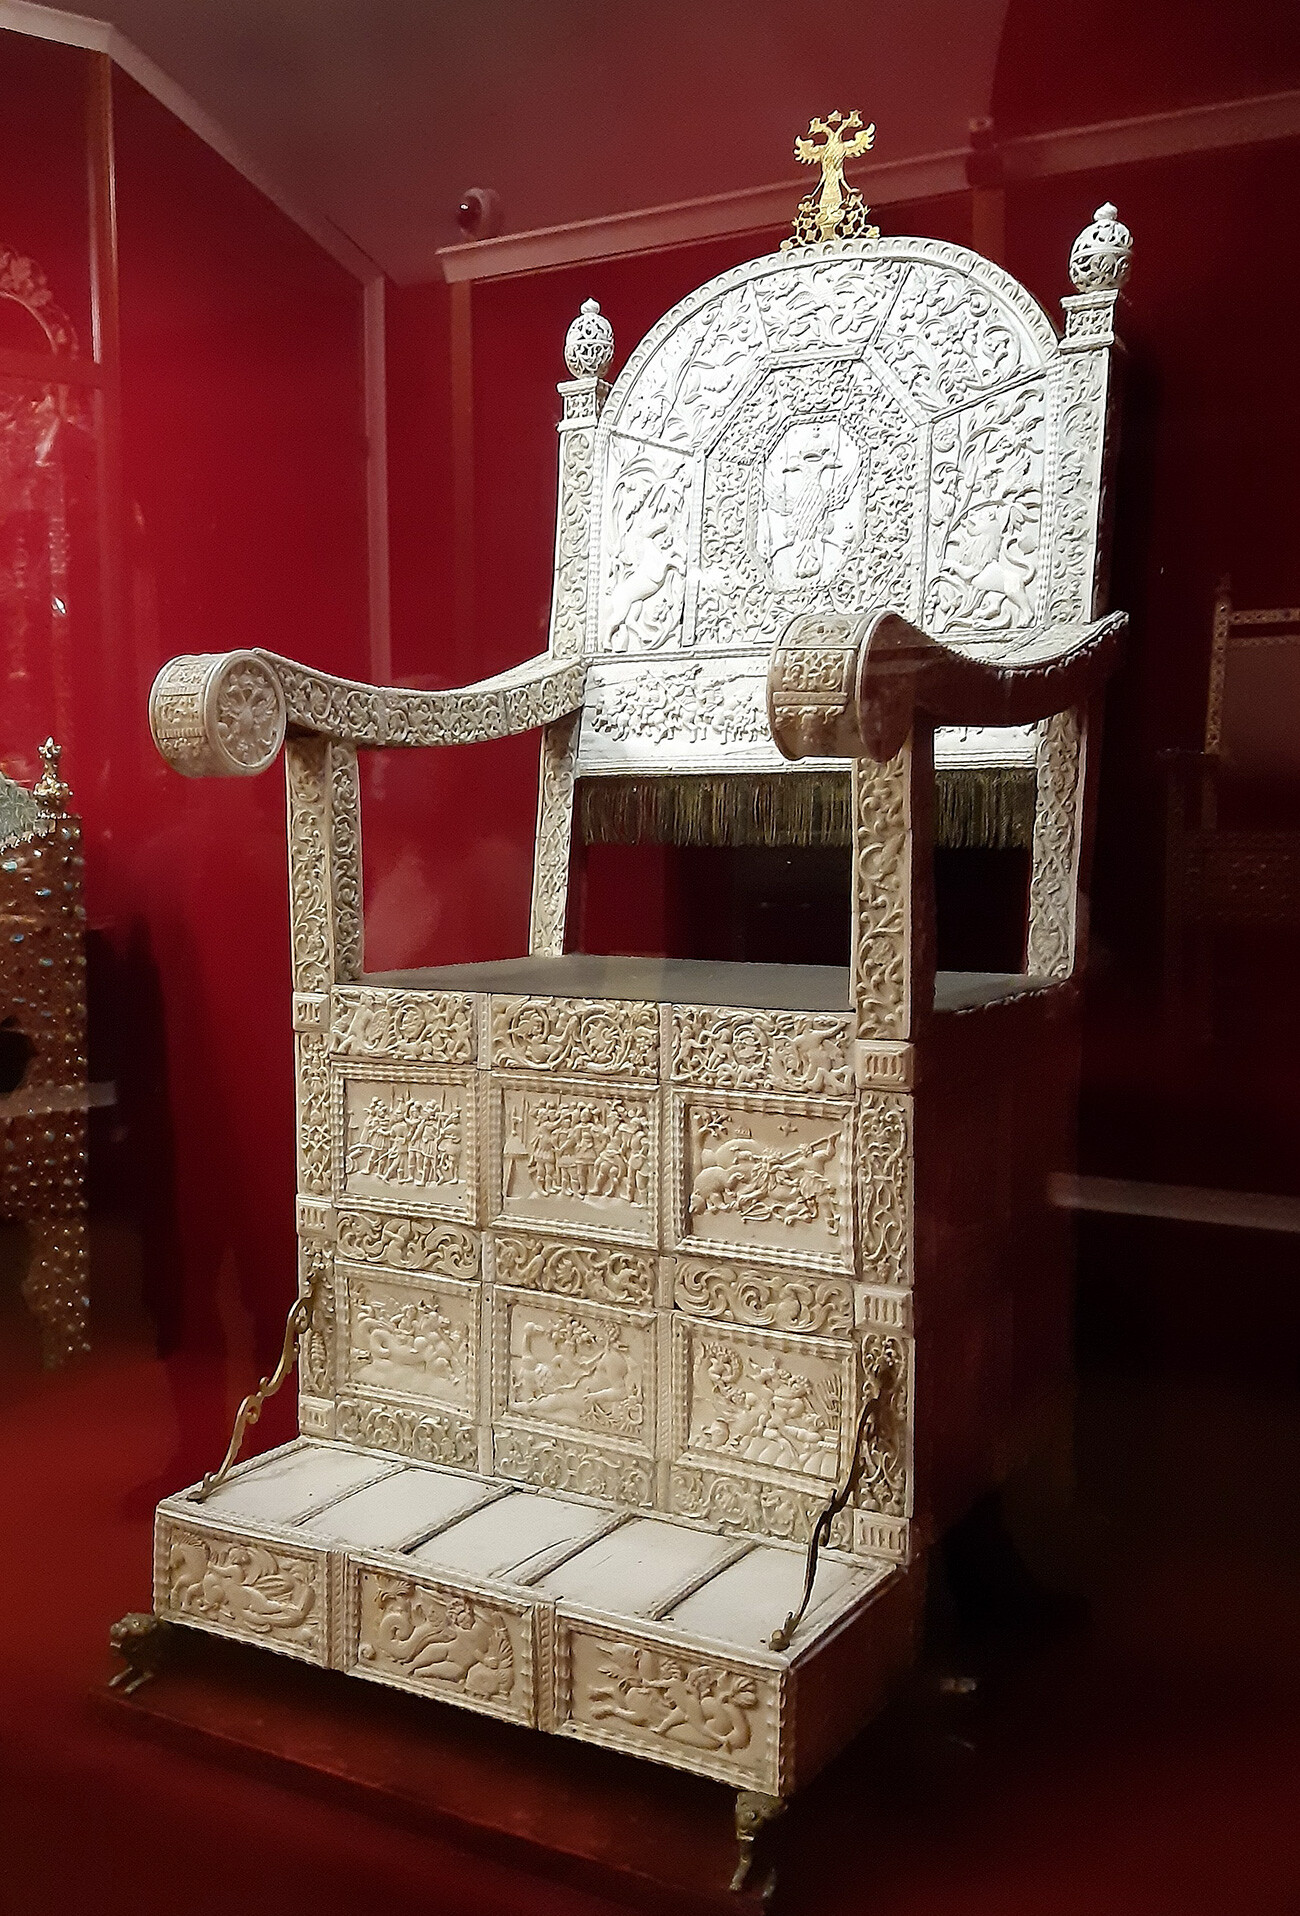 An ivory throne, 16th century. Possibly belonged to Ivan the Terrible. Moscow Kremlin Armoury.